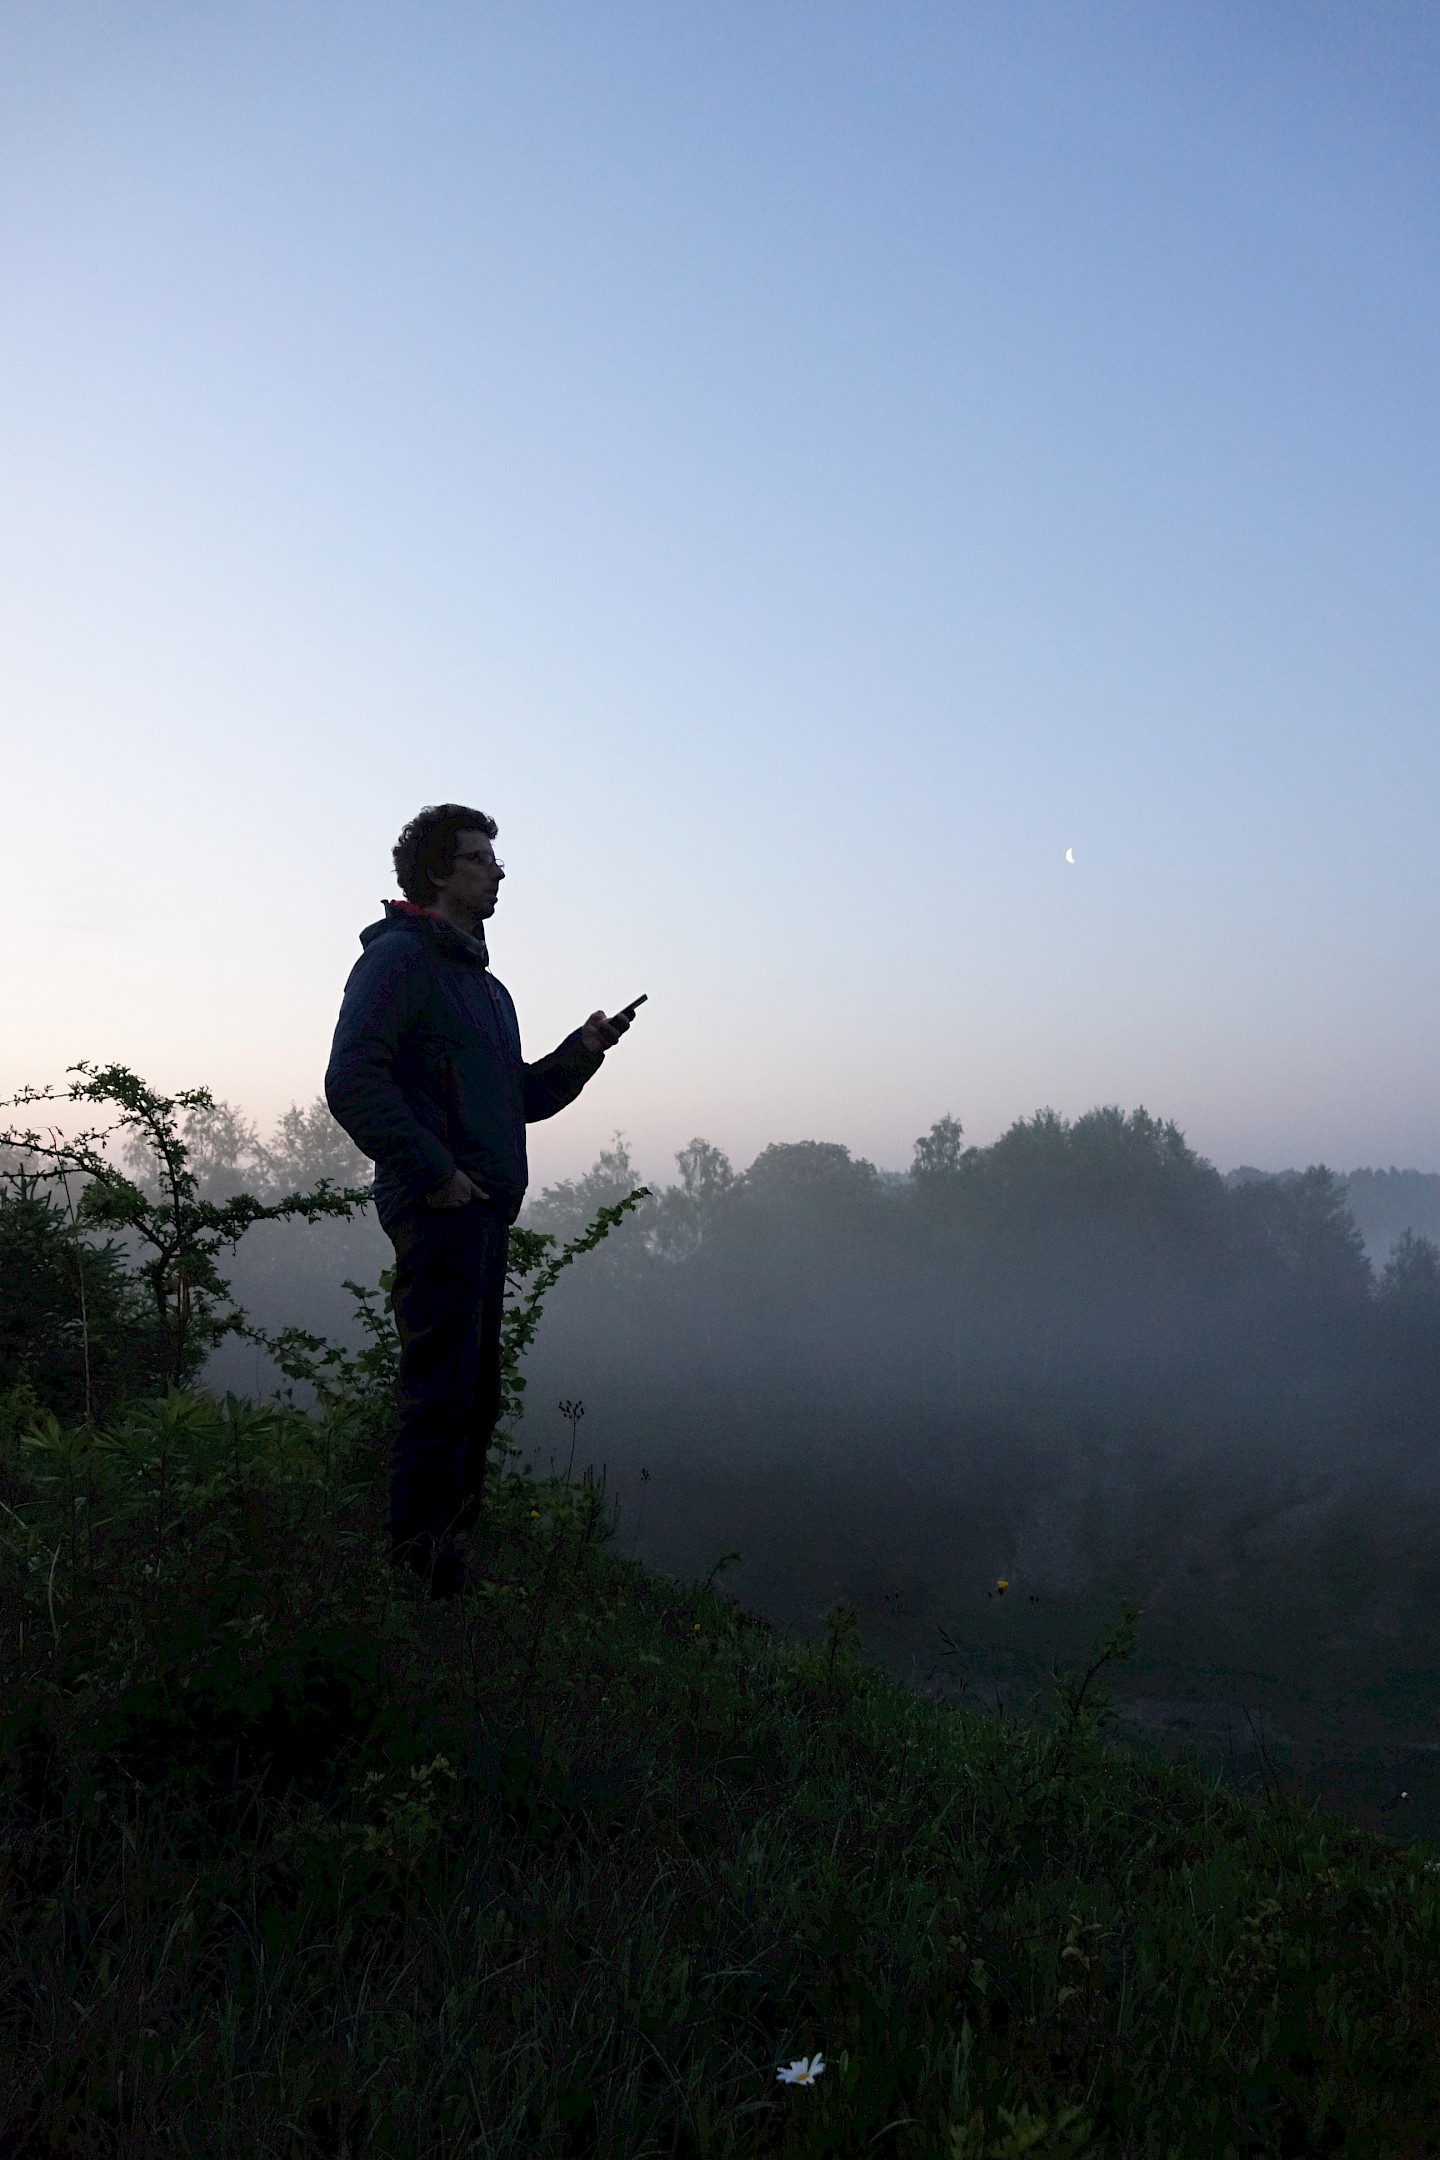 Philipp Herrmann, known as "Der Vogelphilipp" is recording a bird song in the morning hours